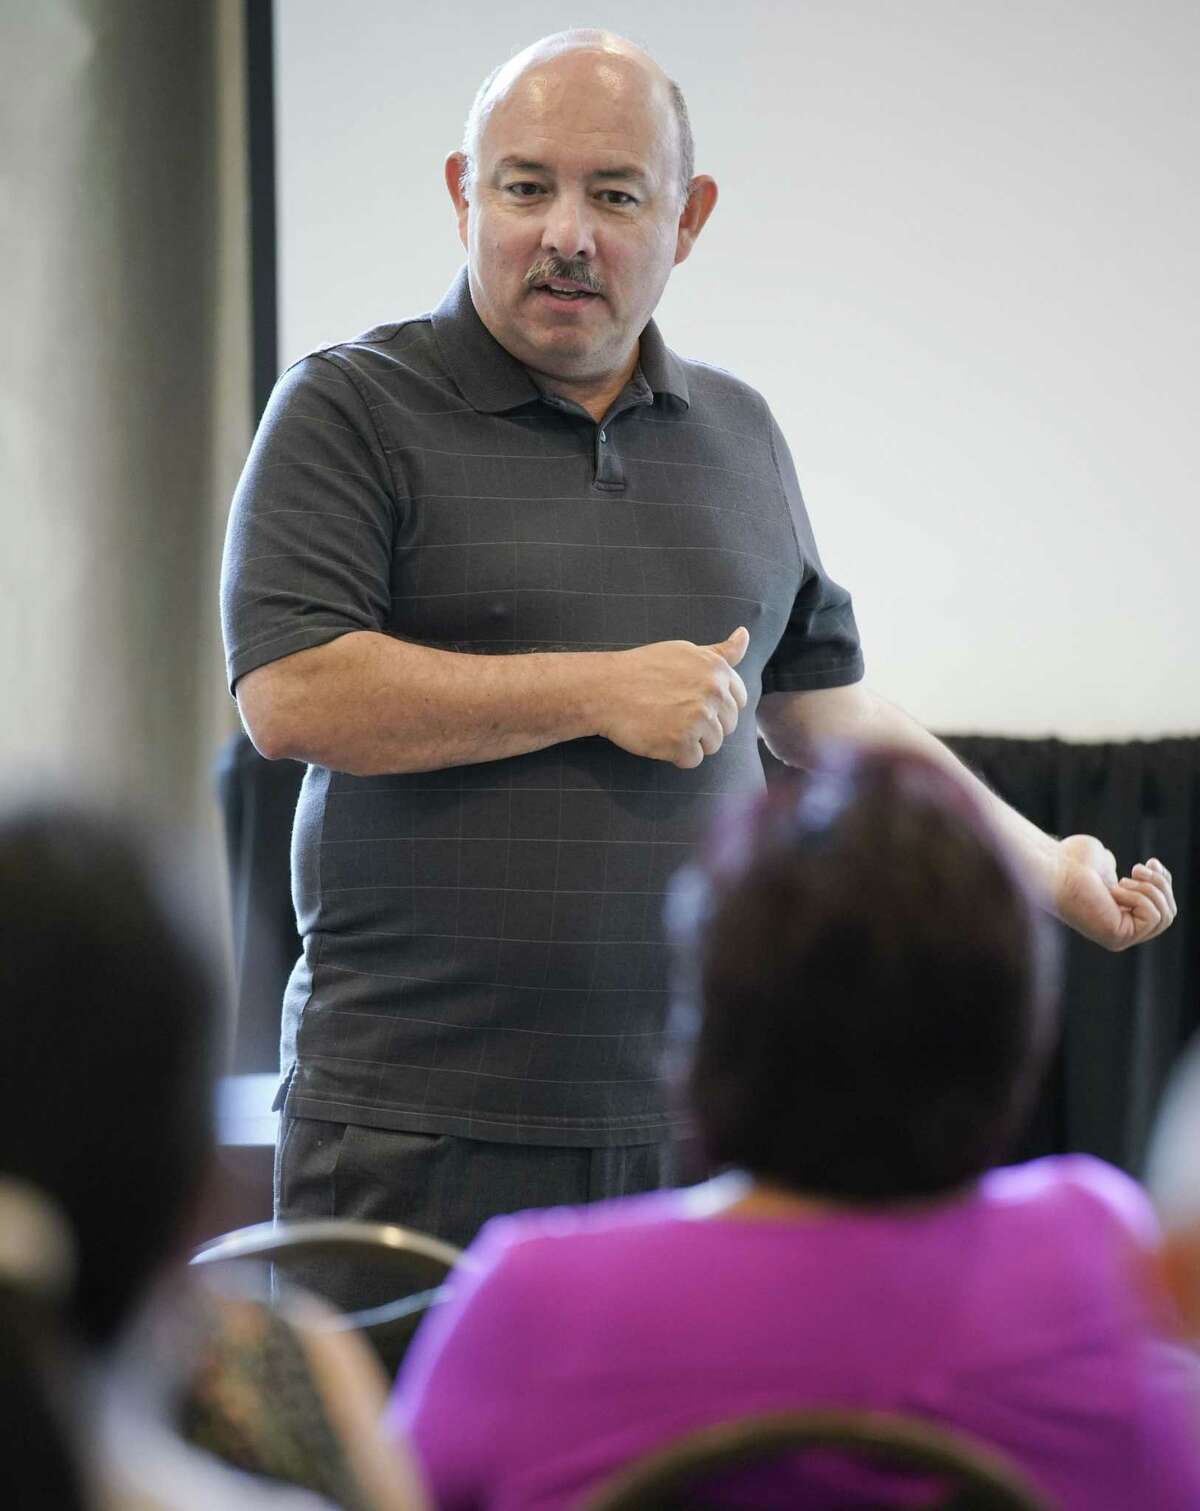 Former federal deportation officer Edwardo Rodriguez speaks during a discussion about immigration, Friday, June 1, 2018, during the 89th LULAC State Convention in San Antonio. (Darren Abate/For the San Antonio Express-News)